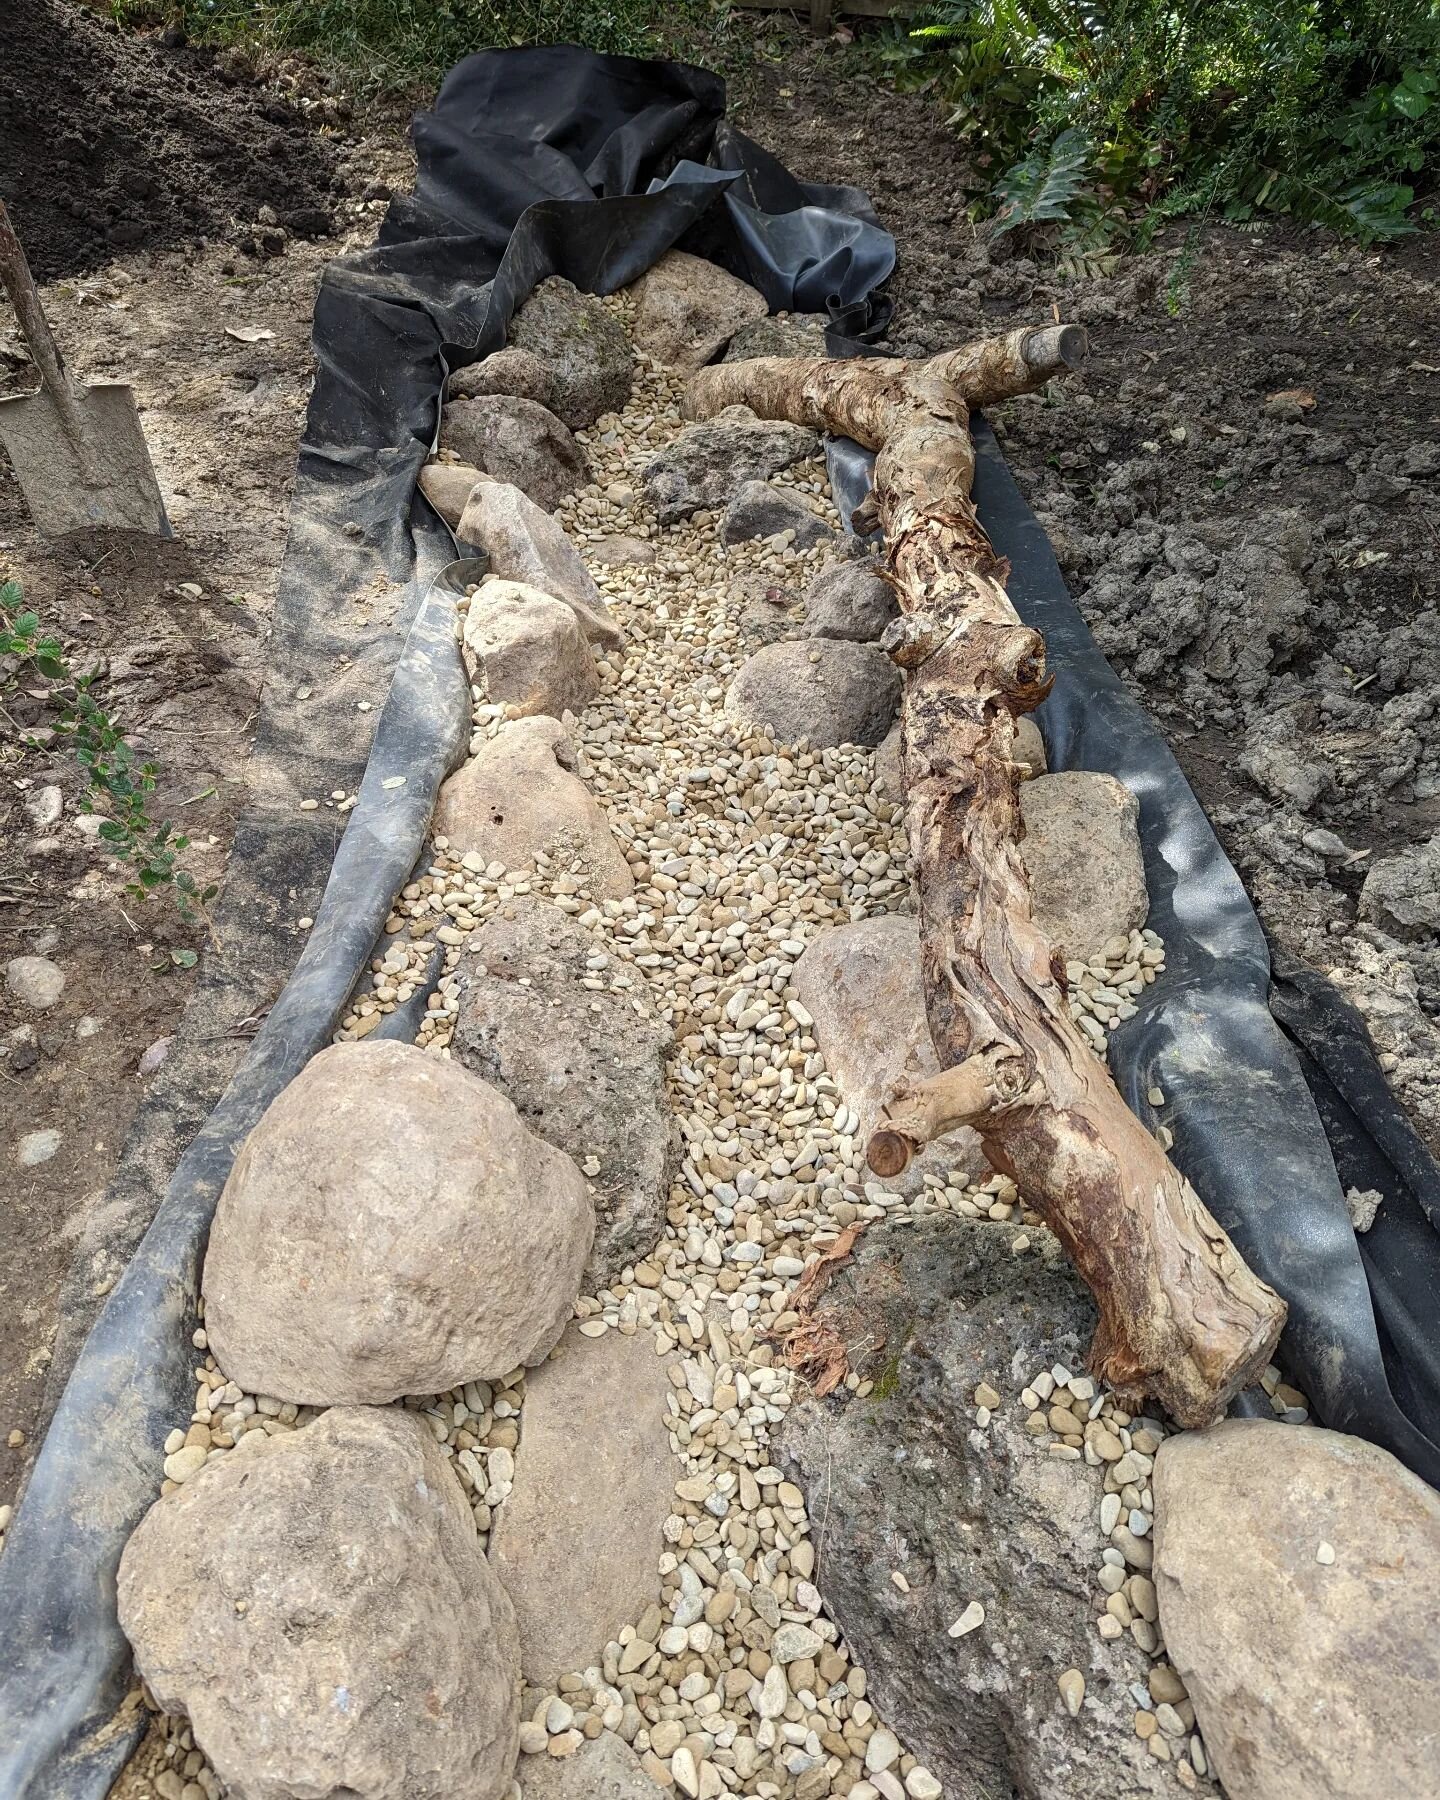 Progress shots are great to show people how our ponds and streams go together! 
We're in #montmorency this week building a neat little water feature, as part of a full backyard makeover, including logs and branches from this property 👍 
Christmas is